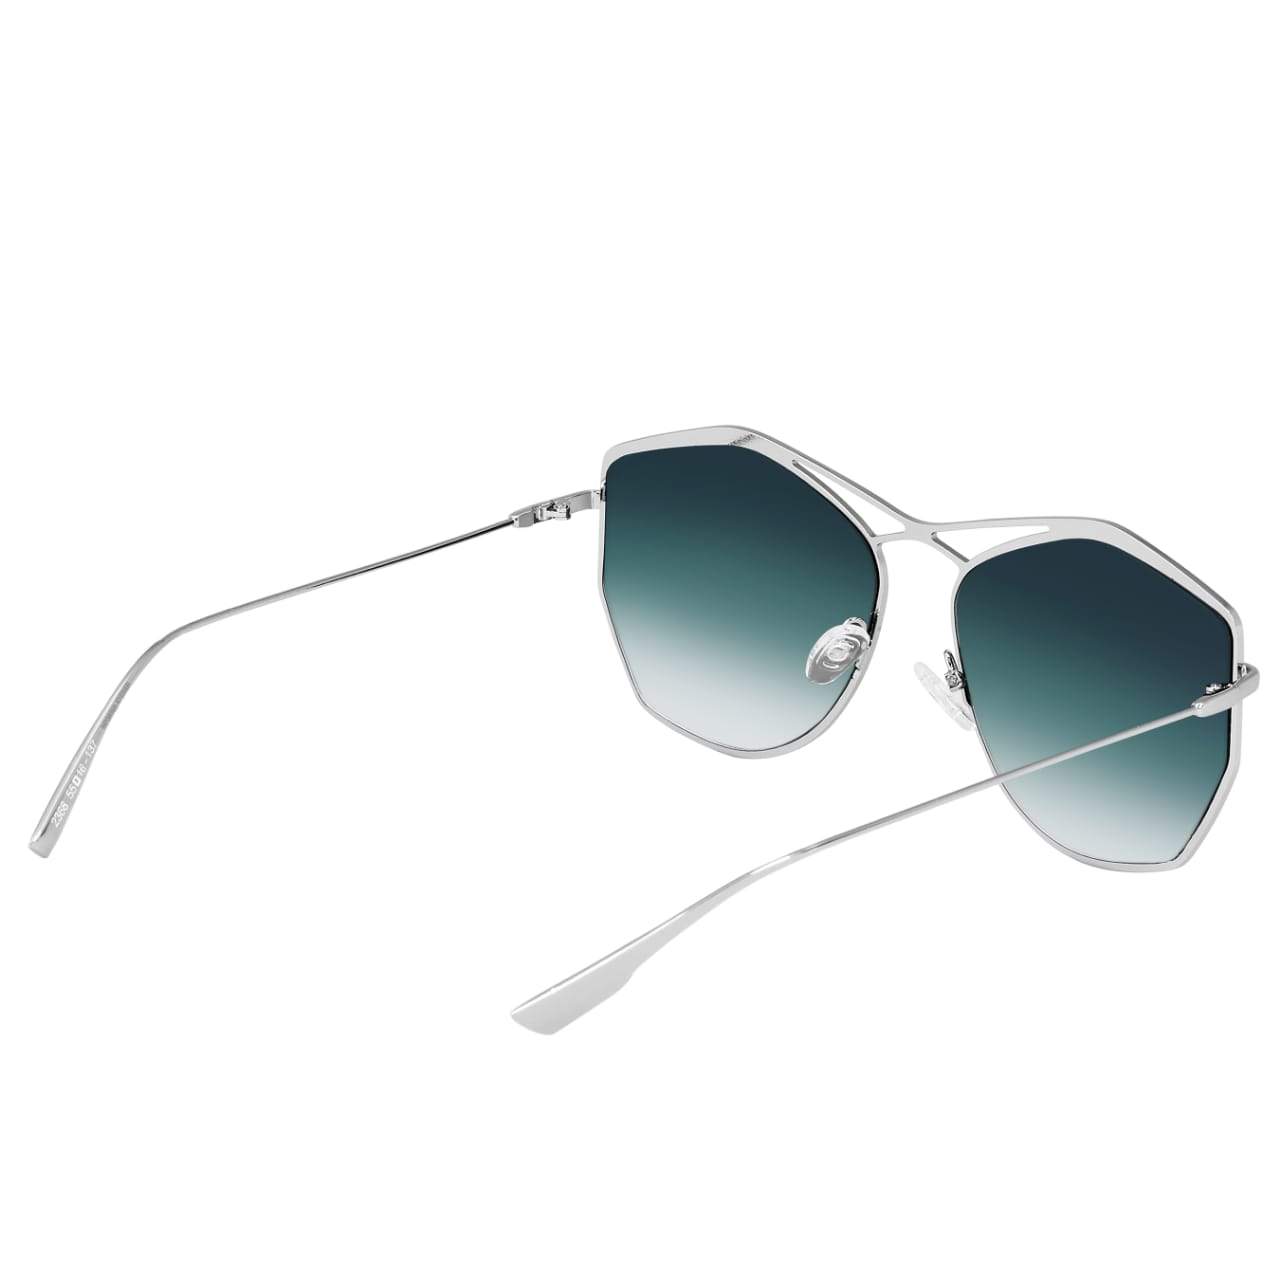 Brand New 2020 Design Metal High Quality Green Gradient Cross Angle Luxury Sunglasses For Men And Women-Unique and Classy